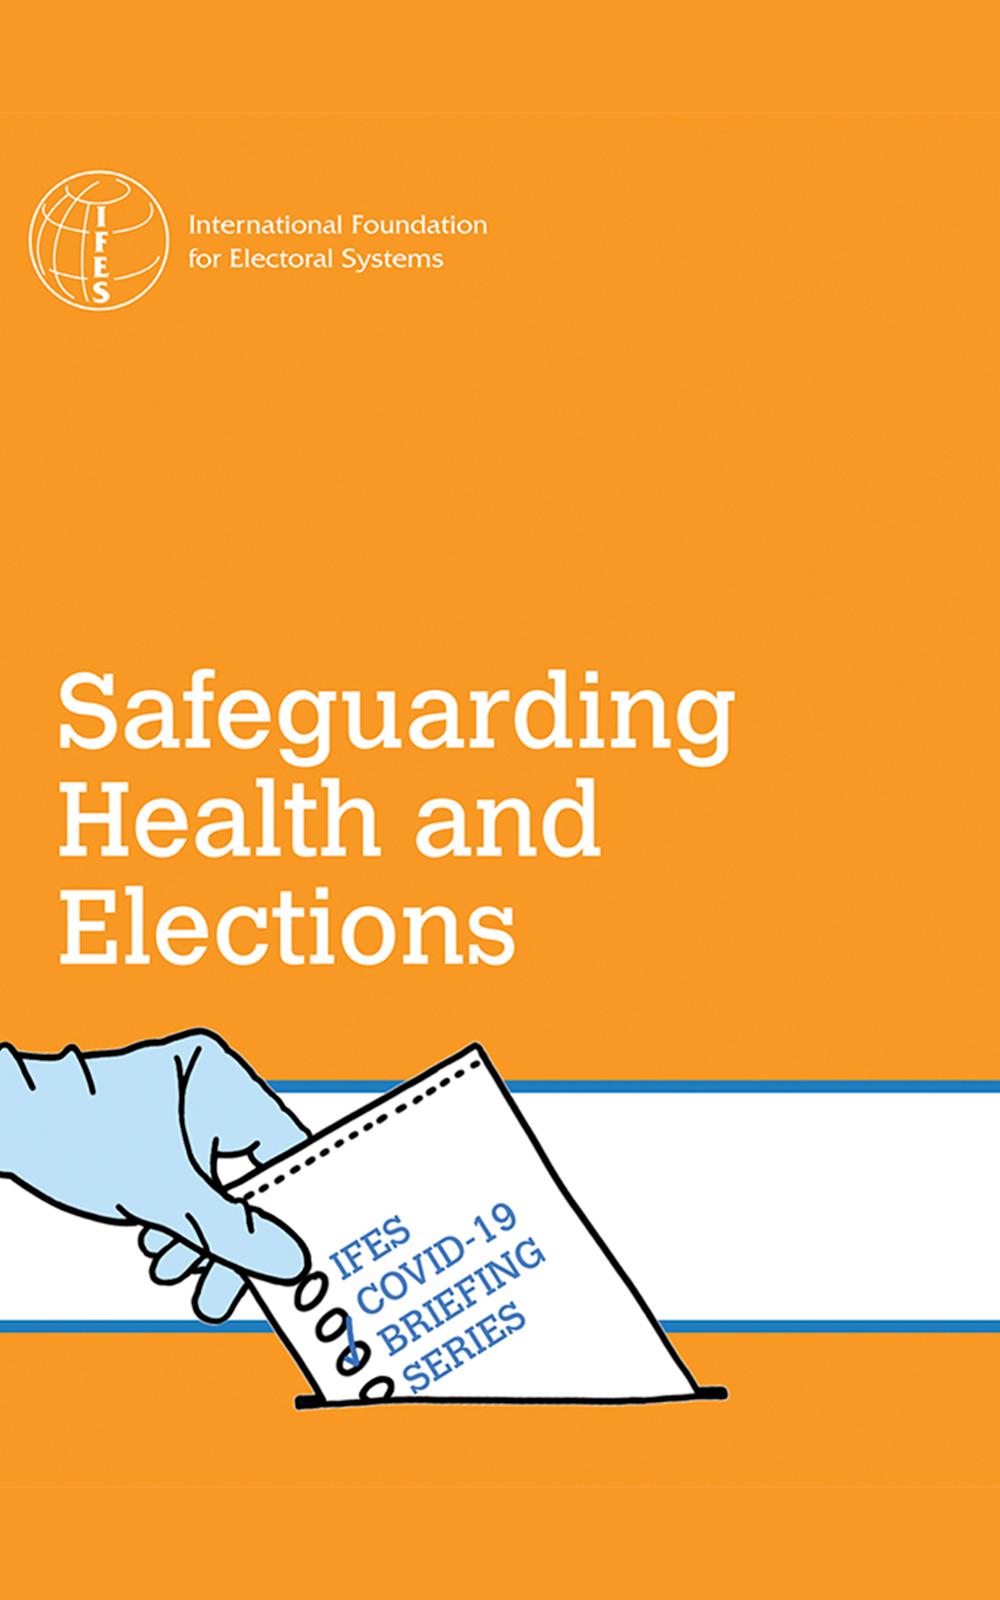 COVID-19 Safeguarding Health and Elections